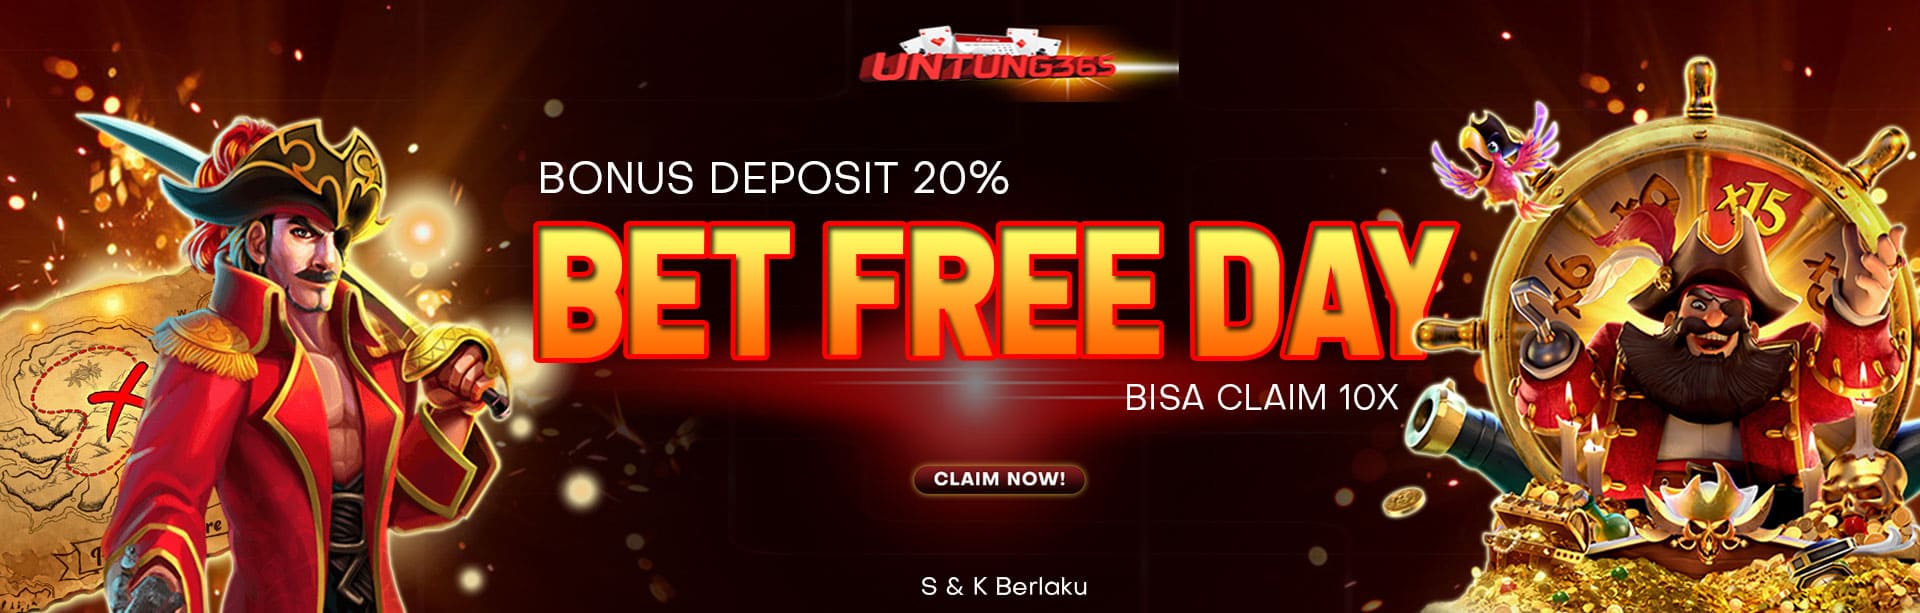 BET FREE DAY